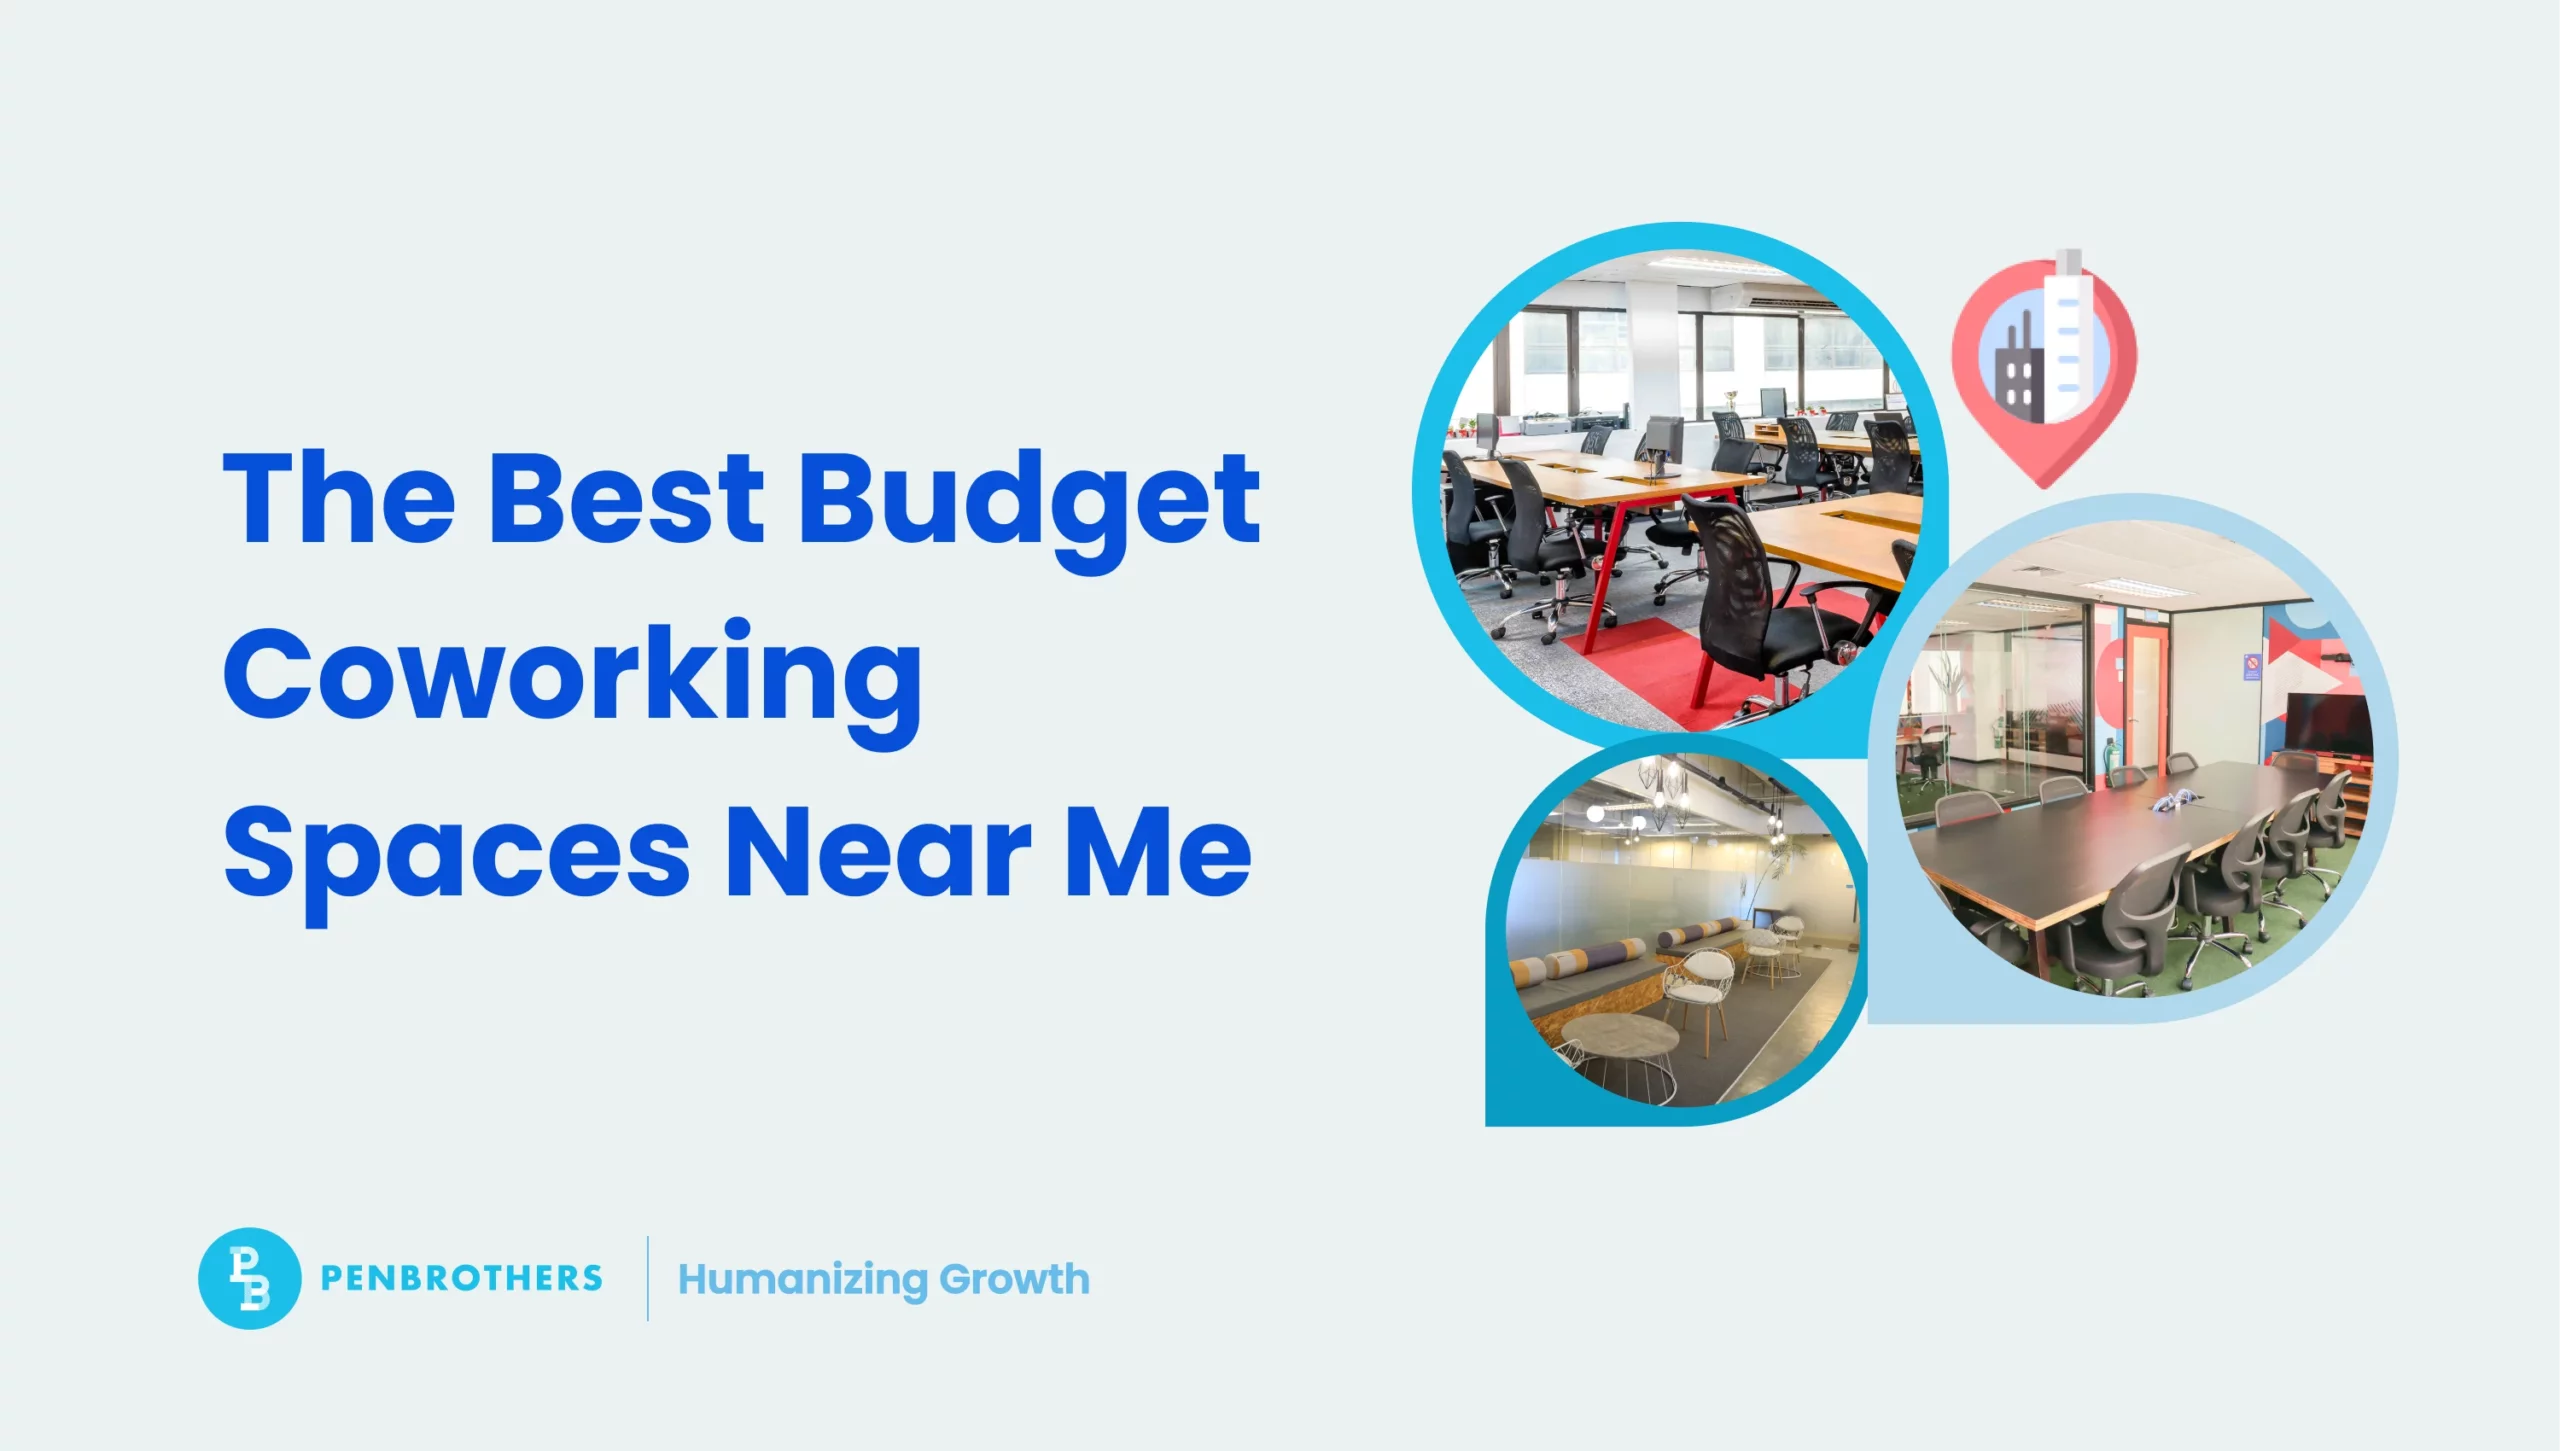 The Best Budget Coworking Spaces Near Me